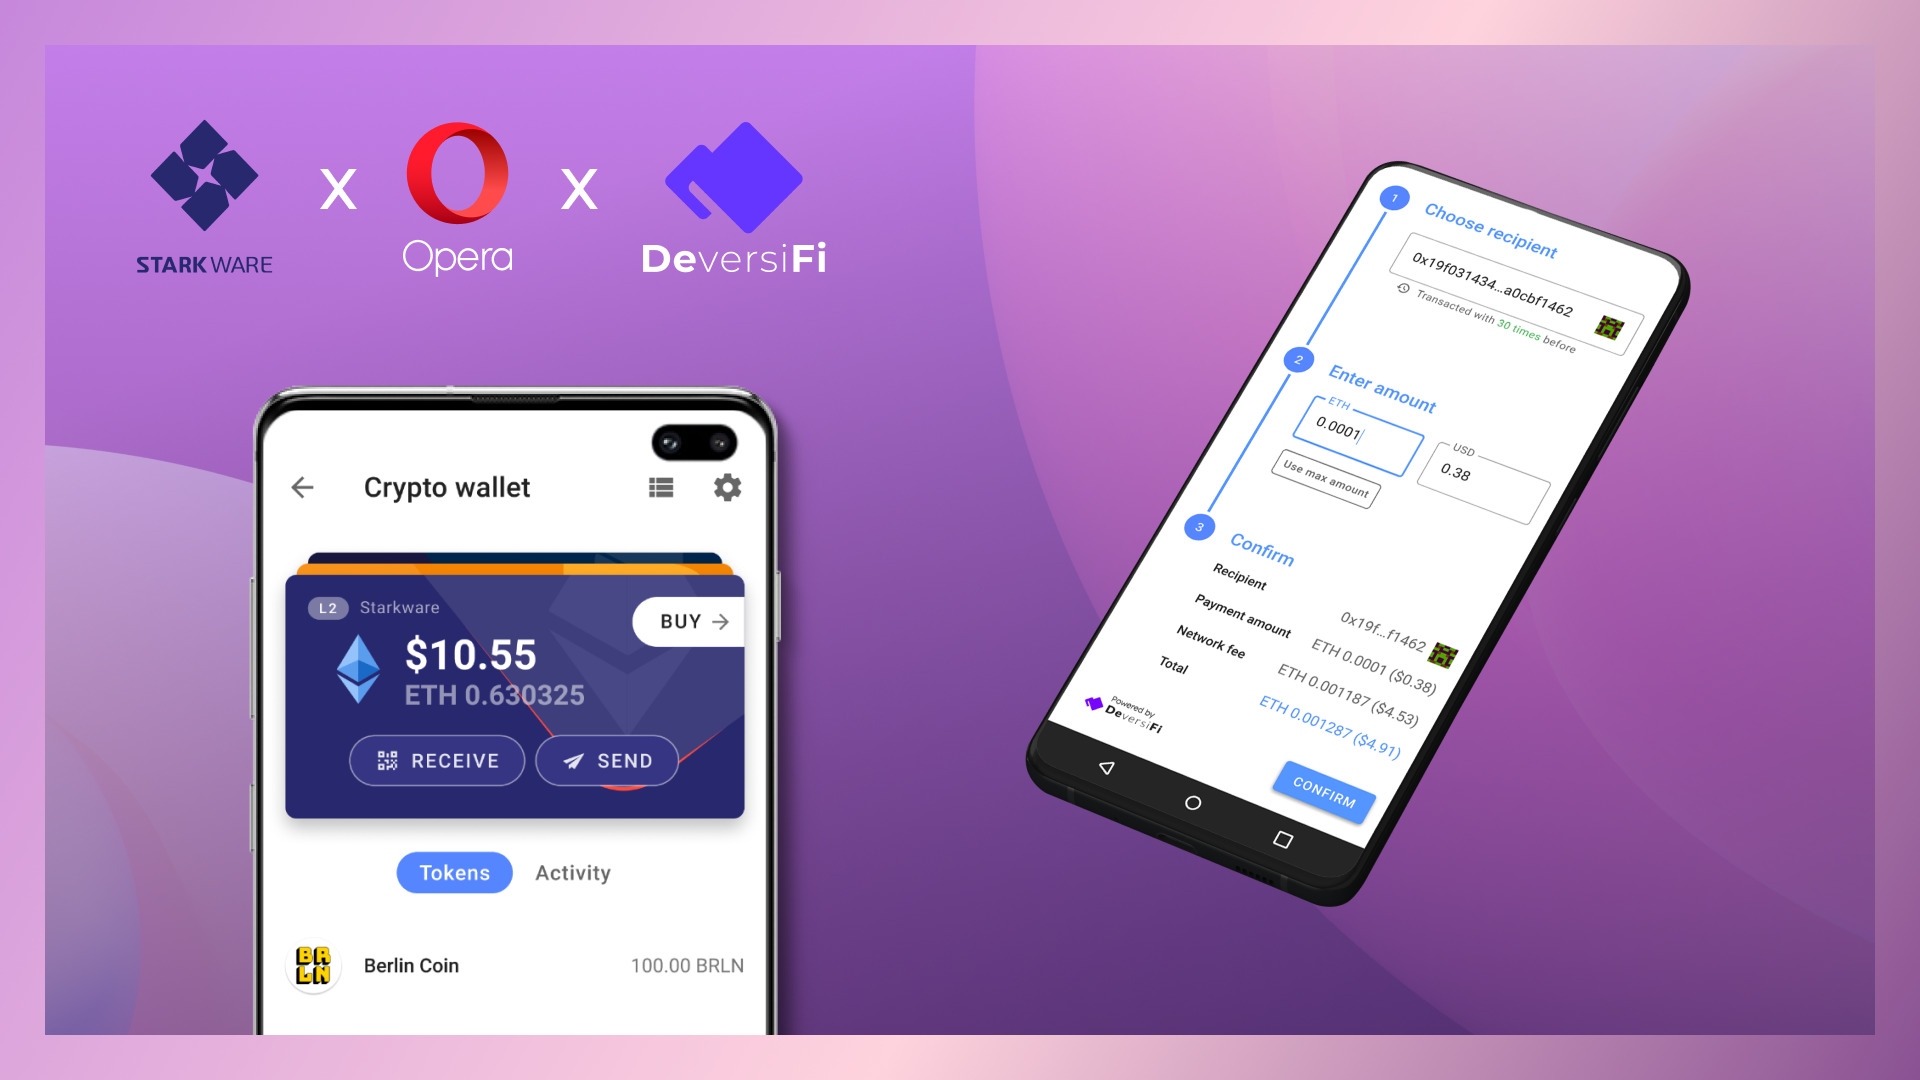 Opera for Android showcasing the Layer2 card in its crypto wallet